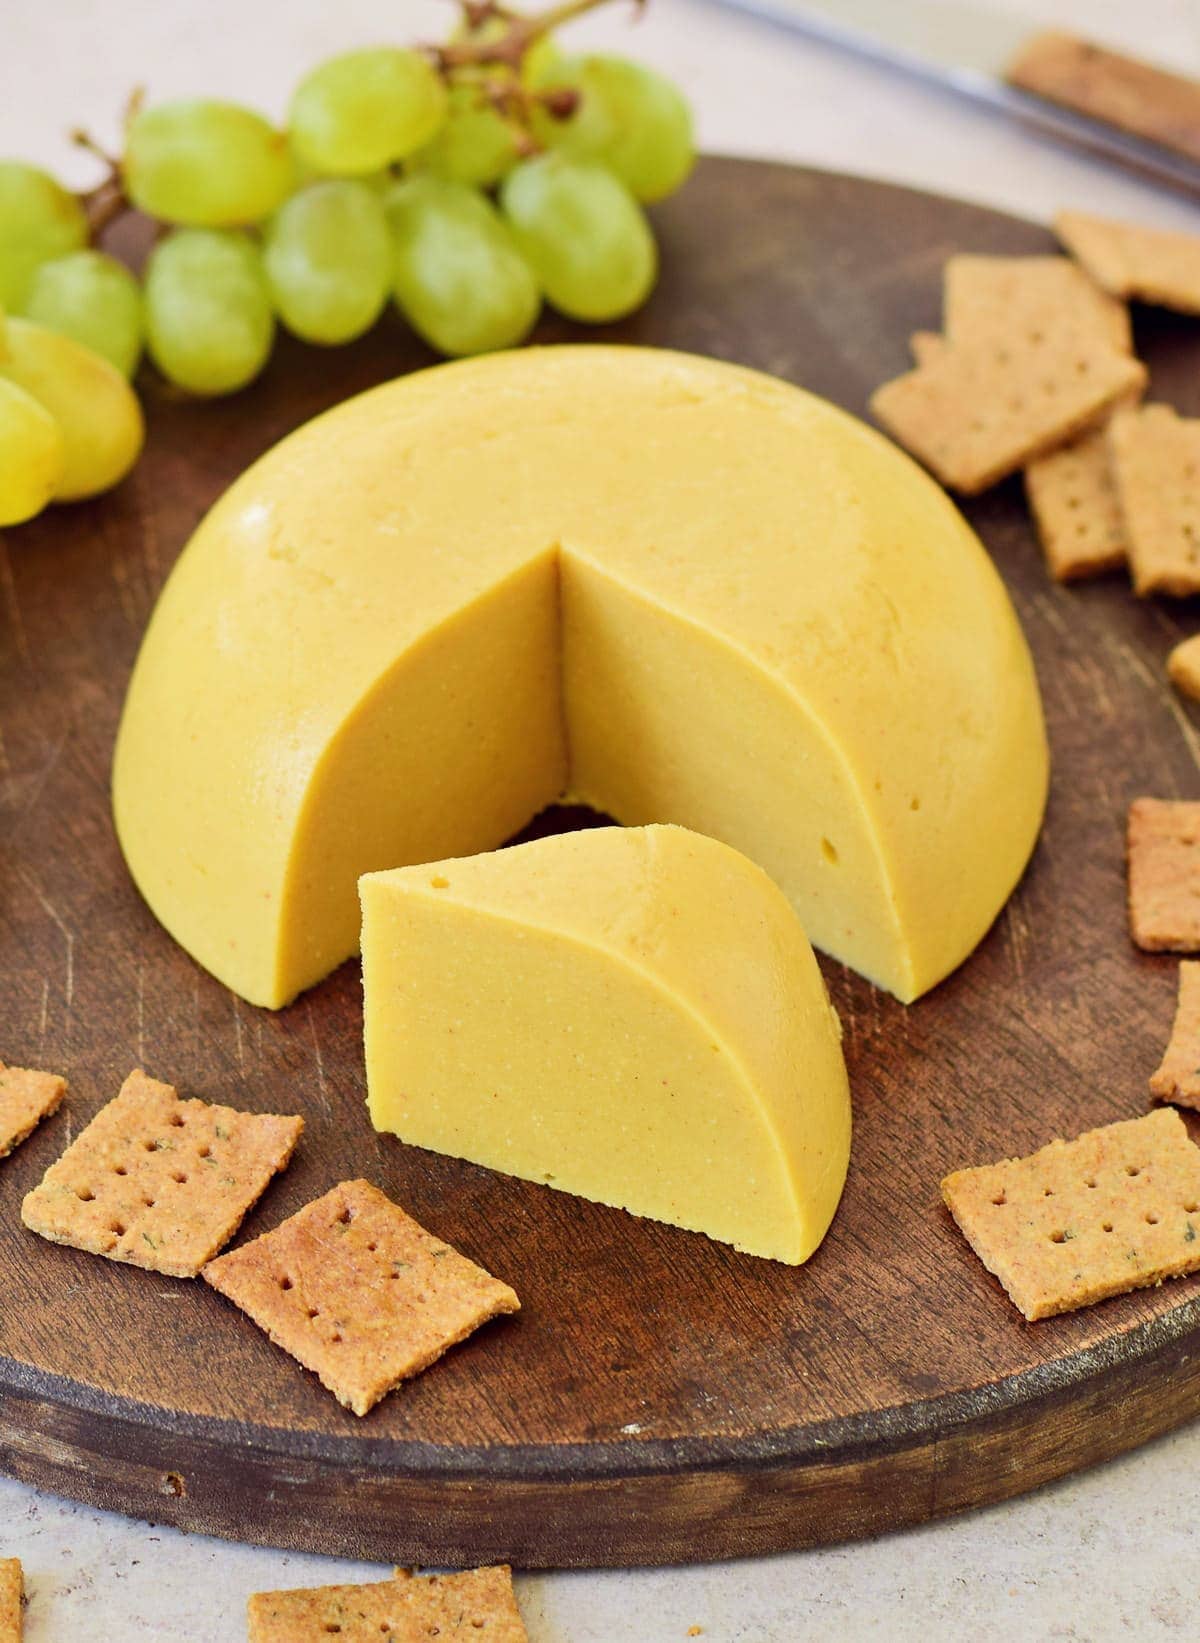 best vegan cheese with crackers and grapes on wooden board